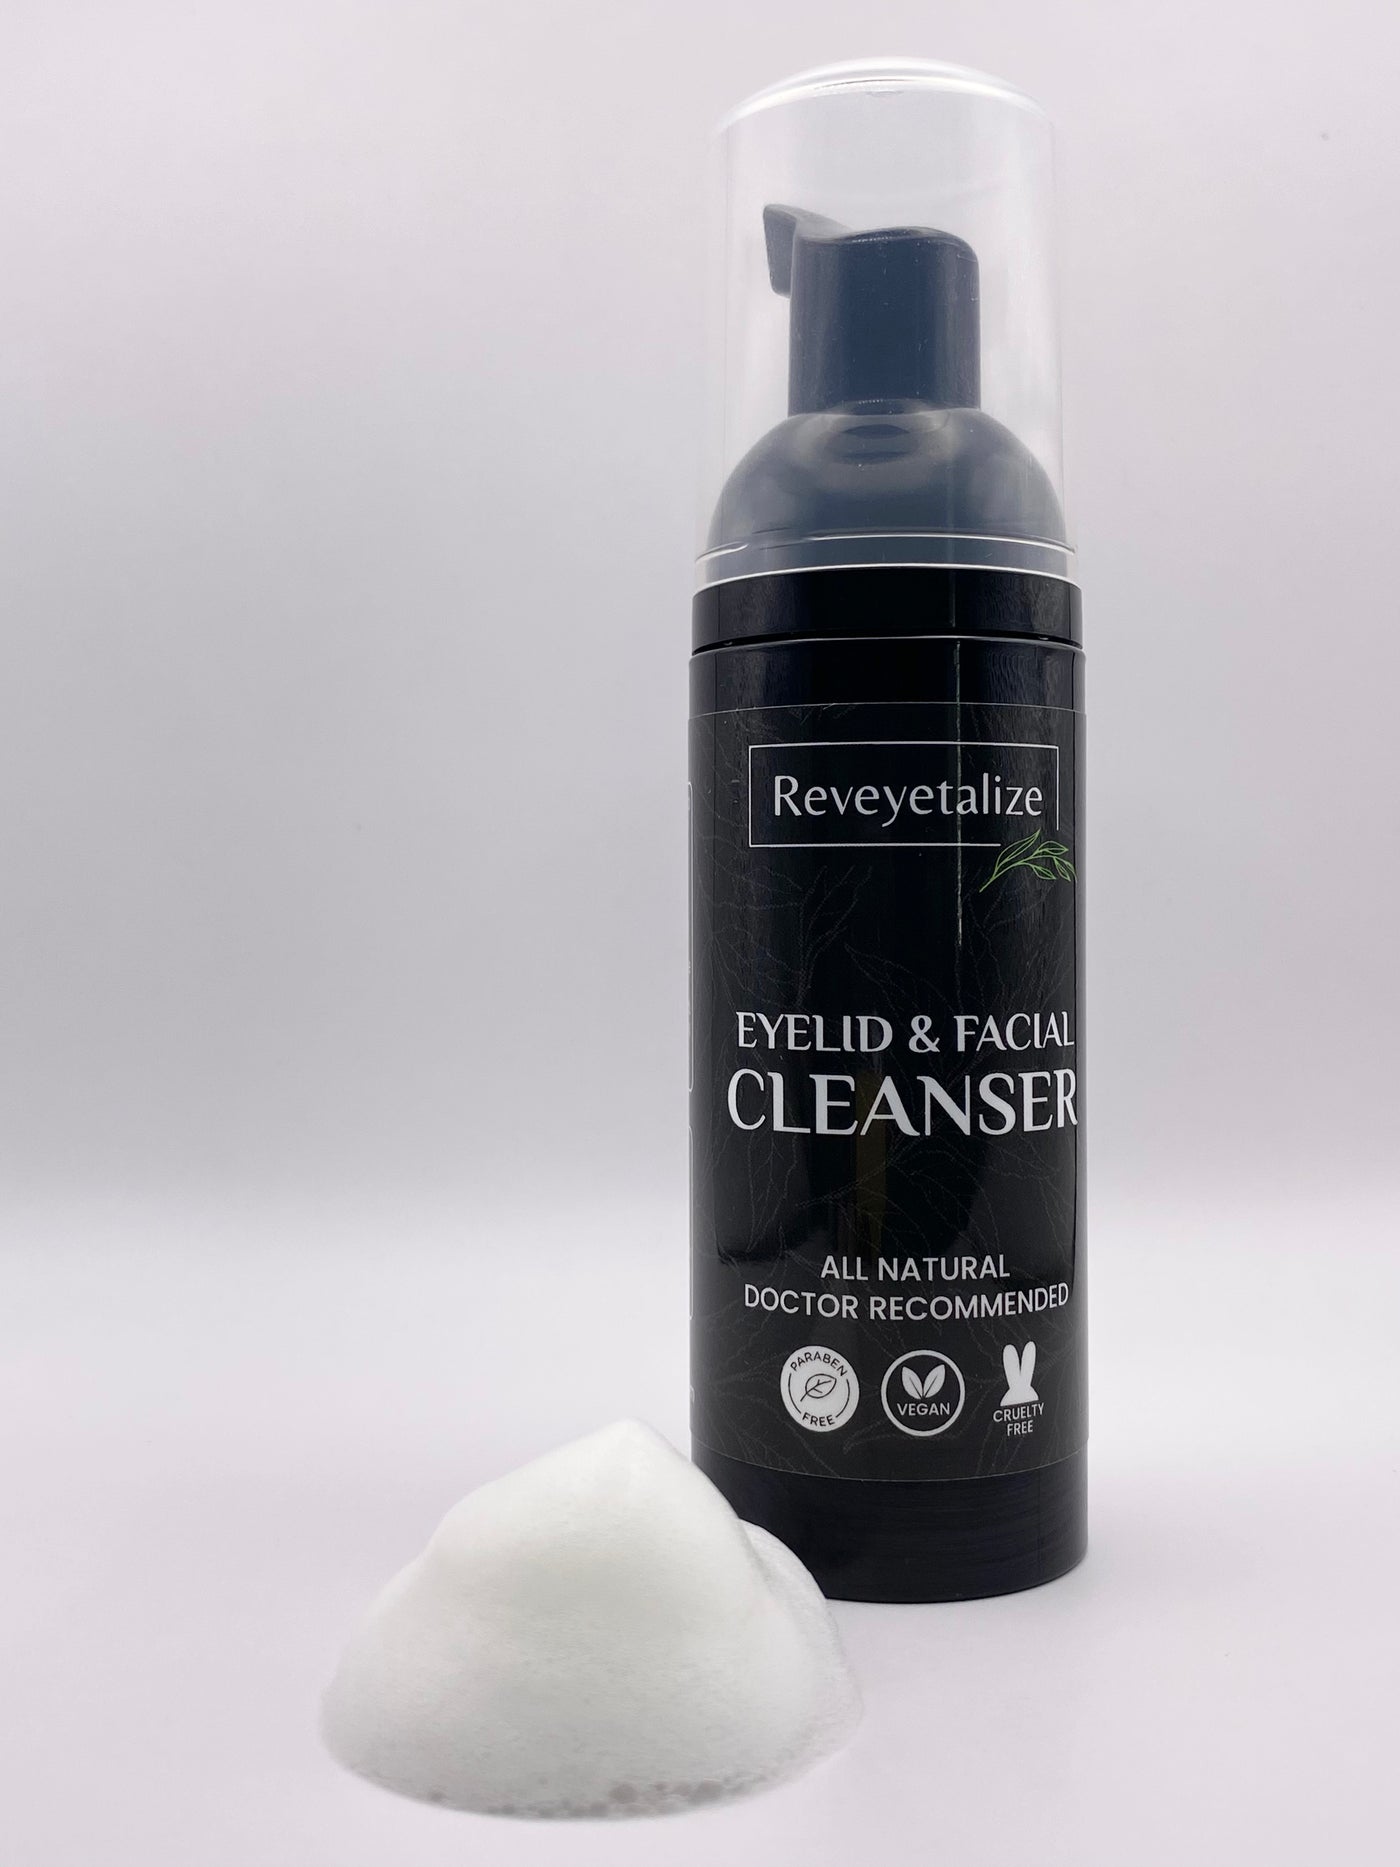 Eyelid & Facial Cleanser